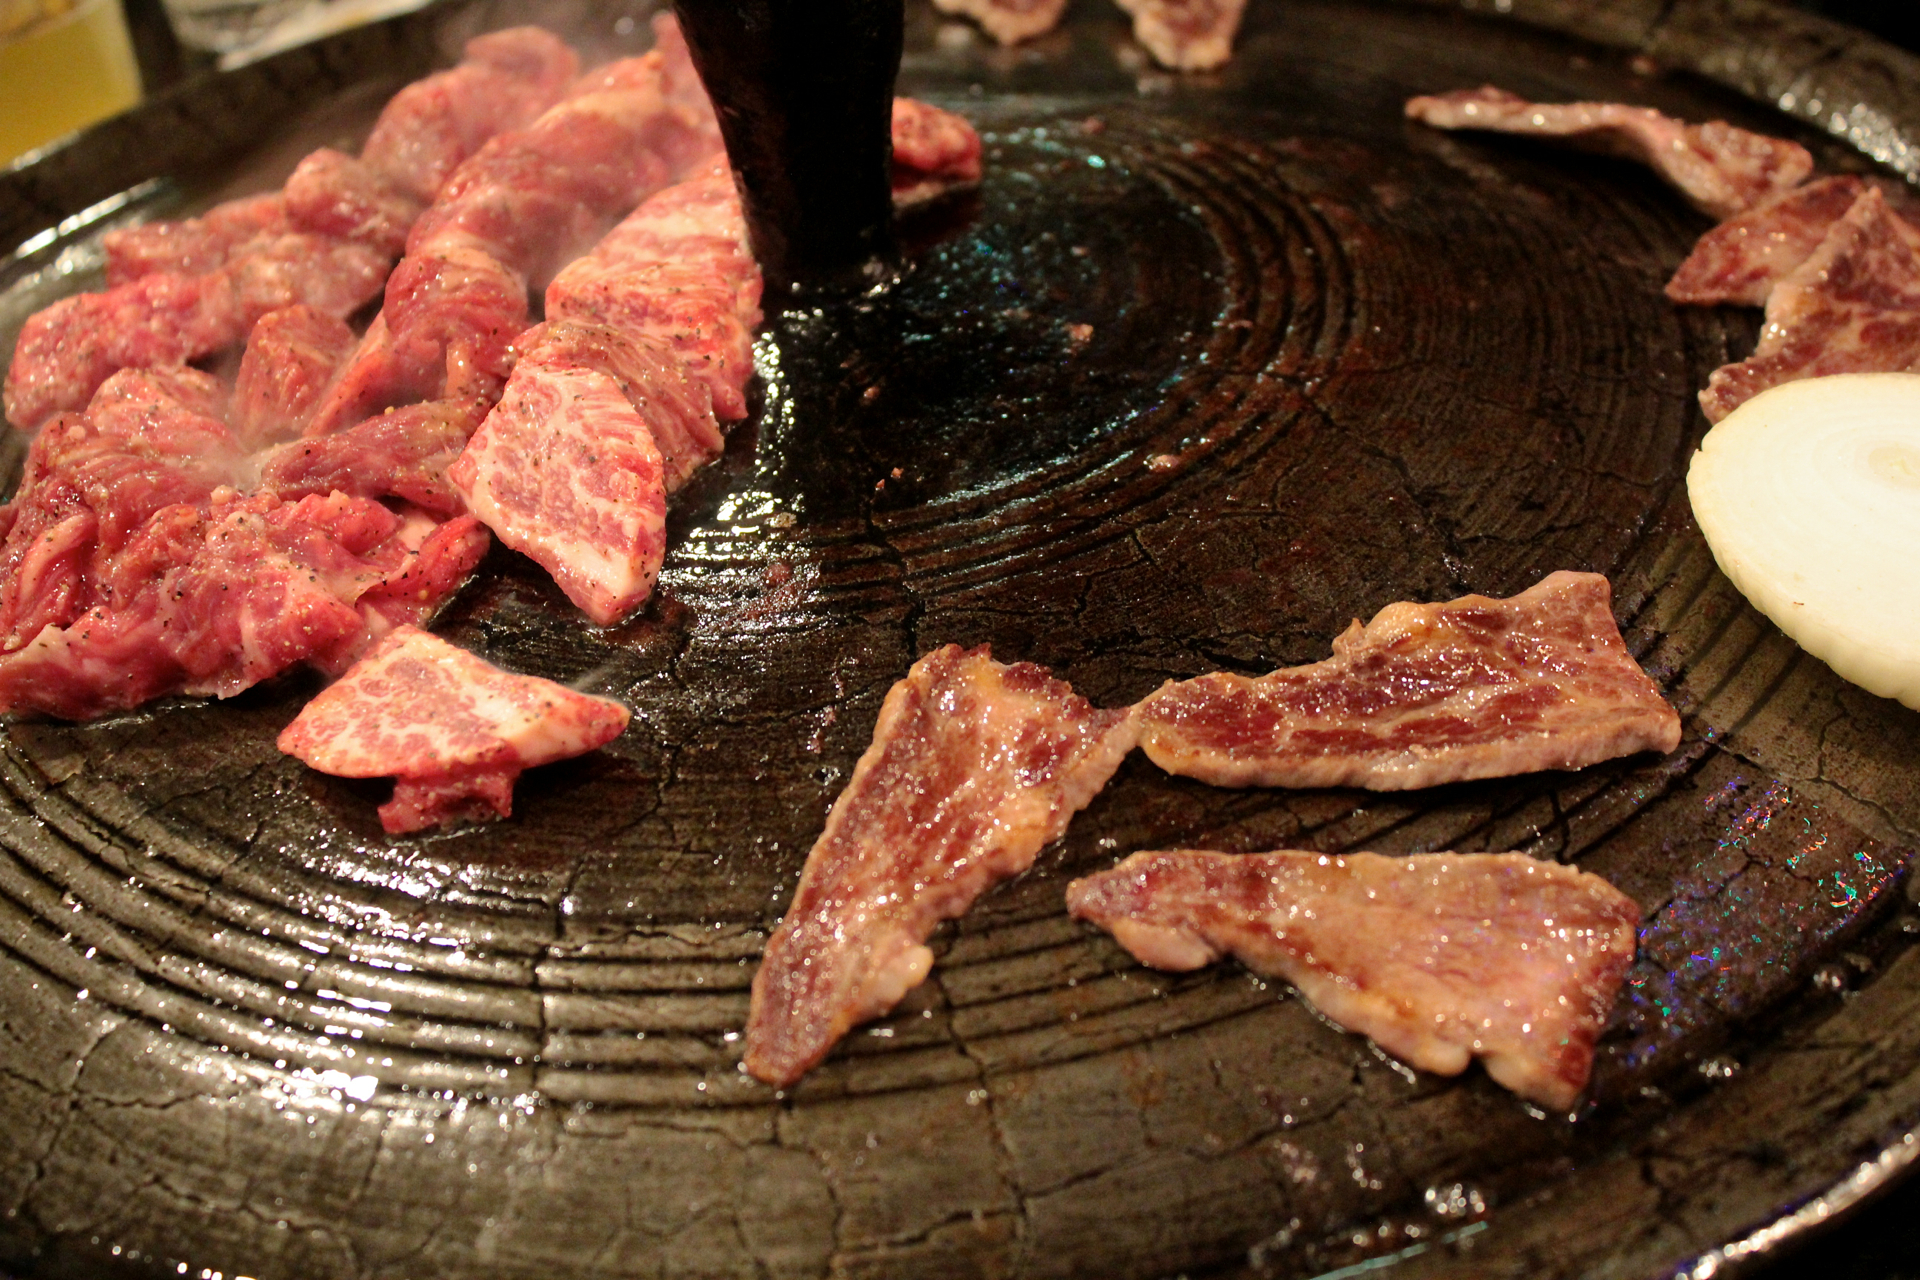 Boneless pieces of short rib marinated in salt and pepper cooking on the griddle at Gooyi Gooyi.